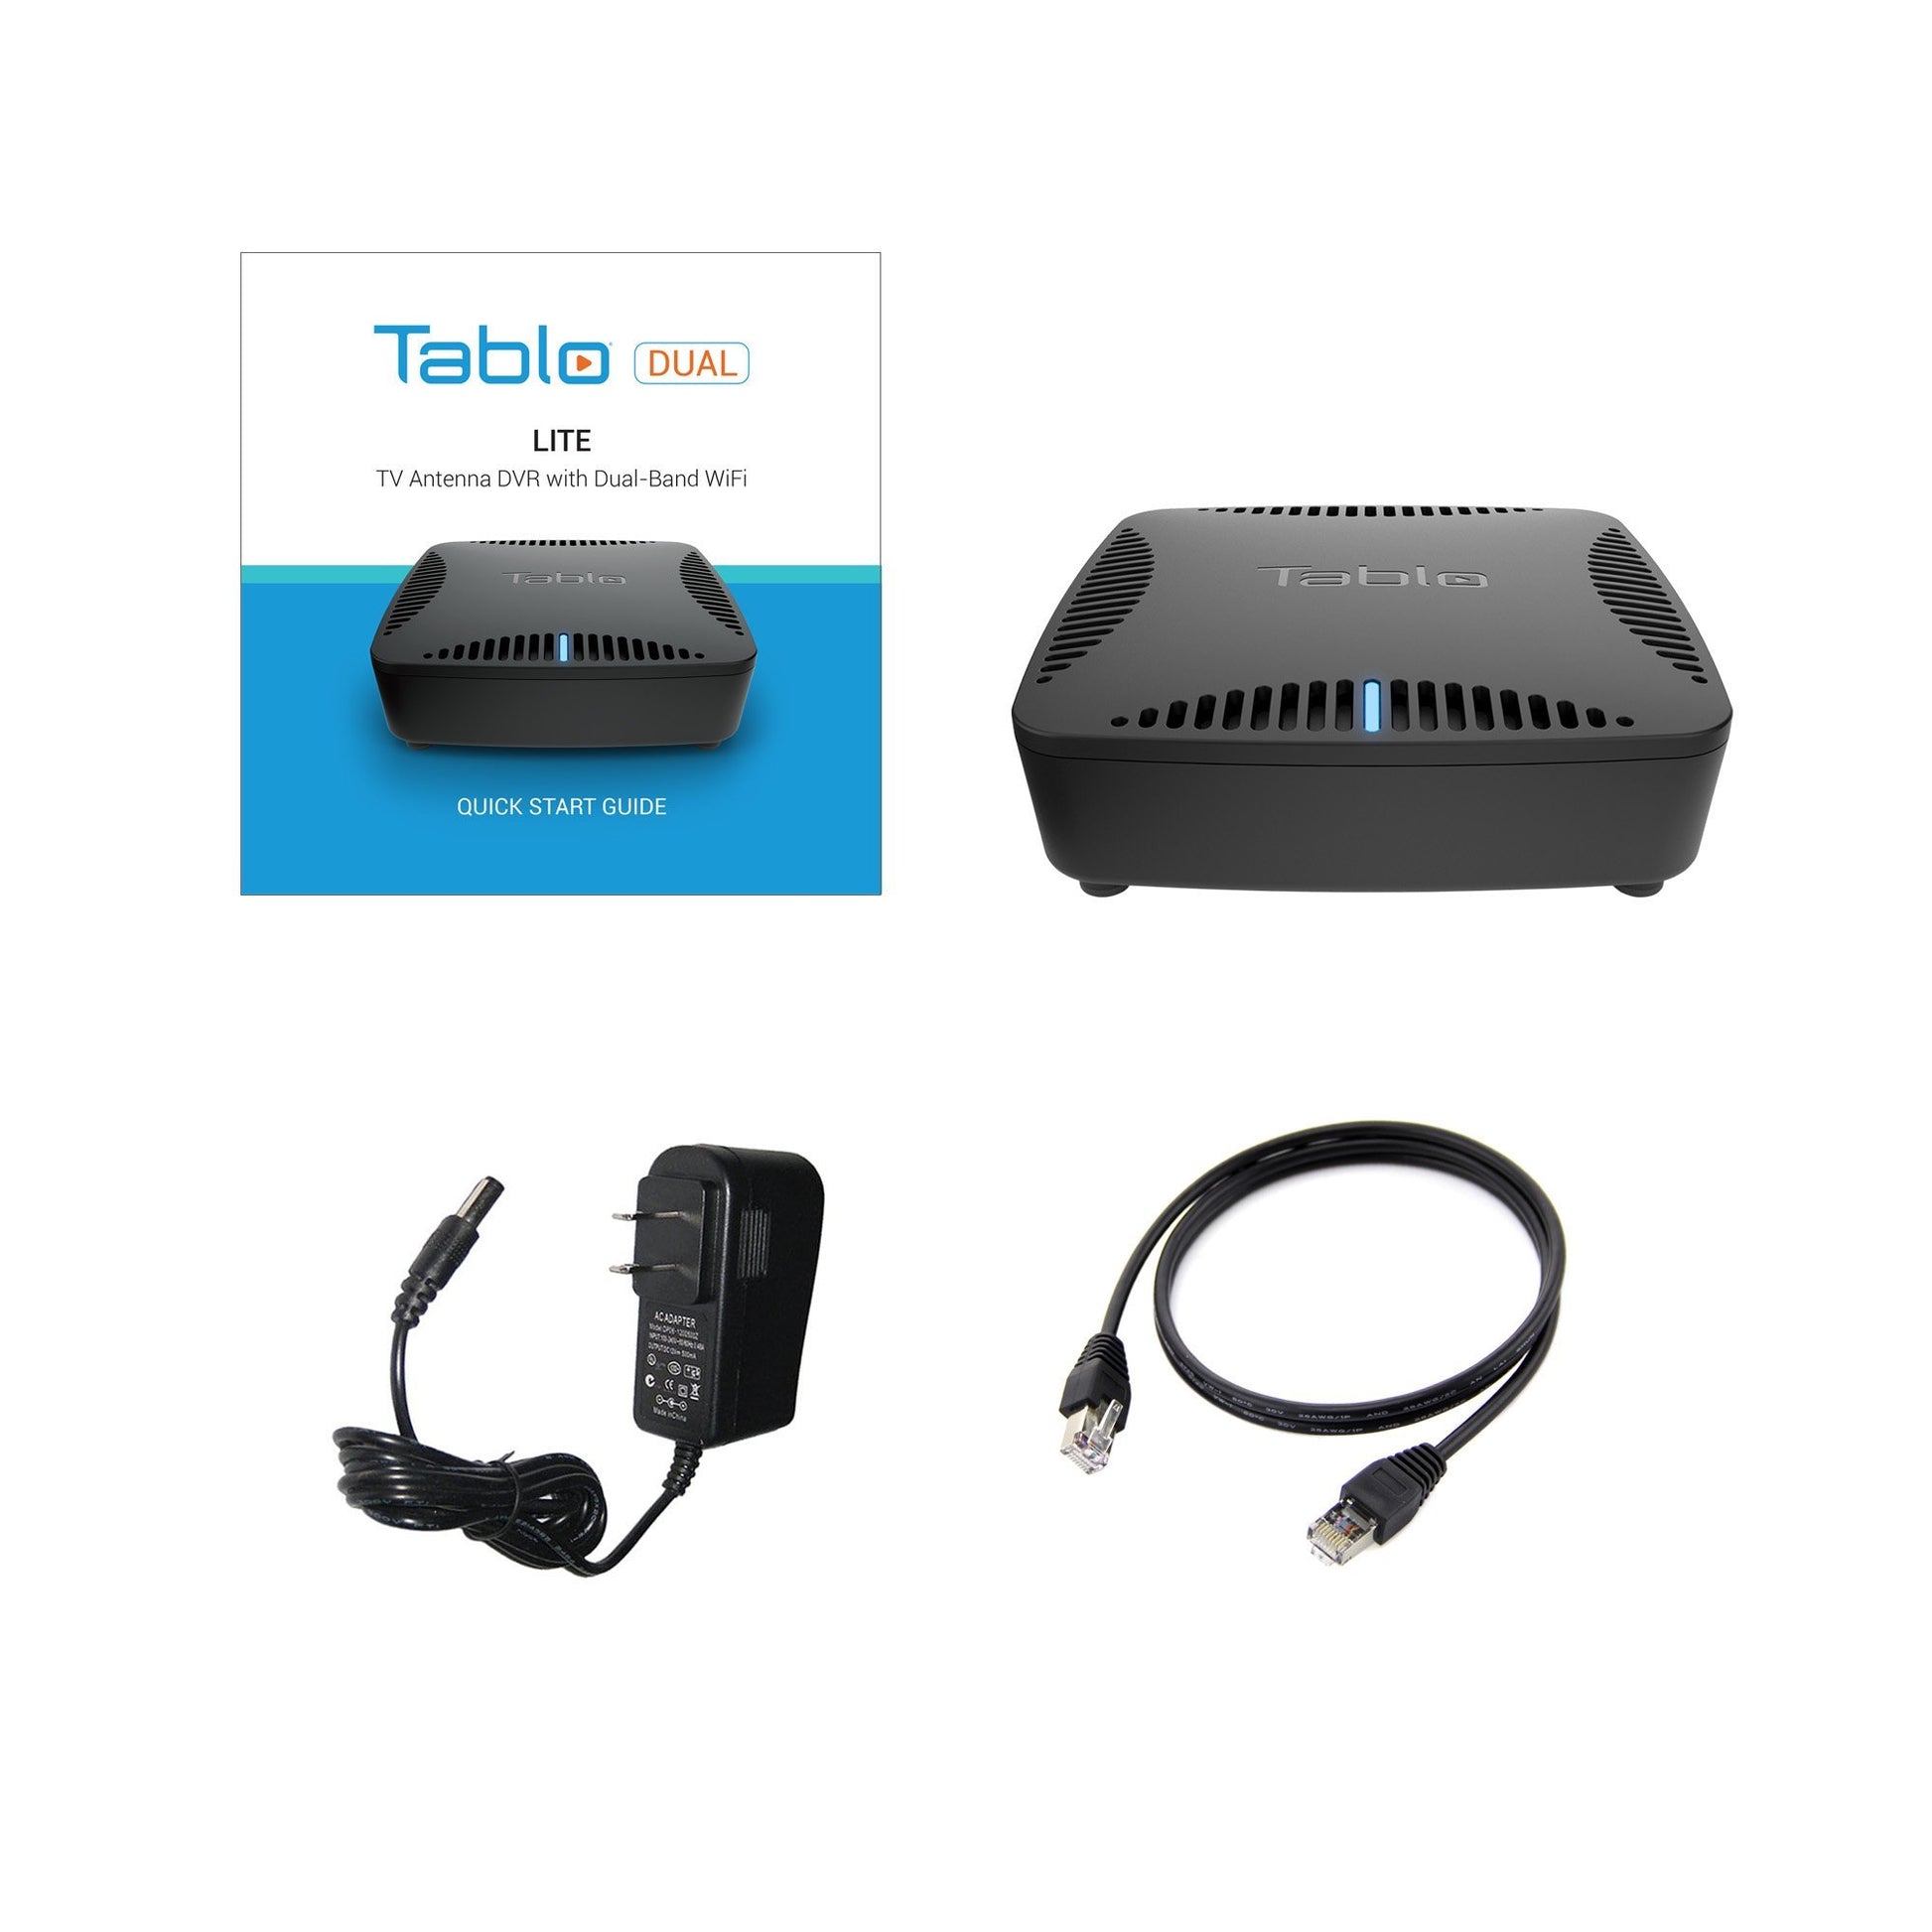 Tablo DUAL LITE Over-The-Air (OTA) DVR (Digital Video Recorder) for Cord Cutters. What's in the box: Quick Start Guide, DVR, power adapter, ethernet cable.